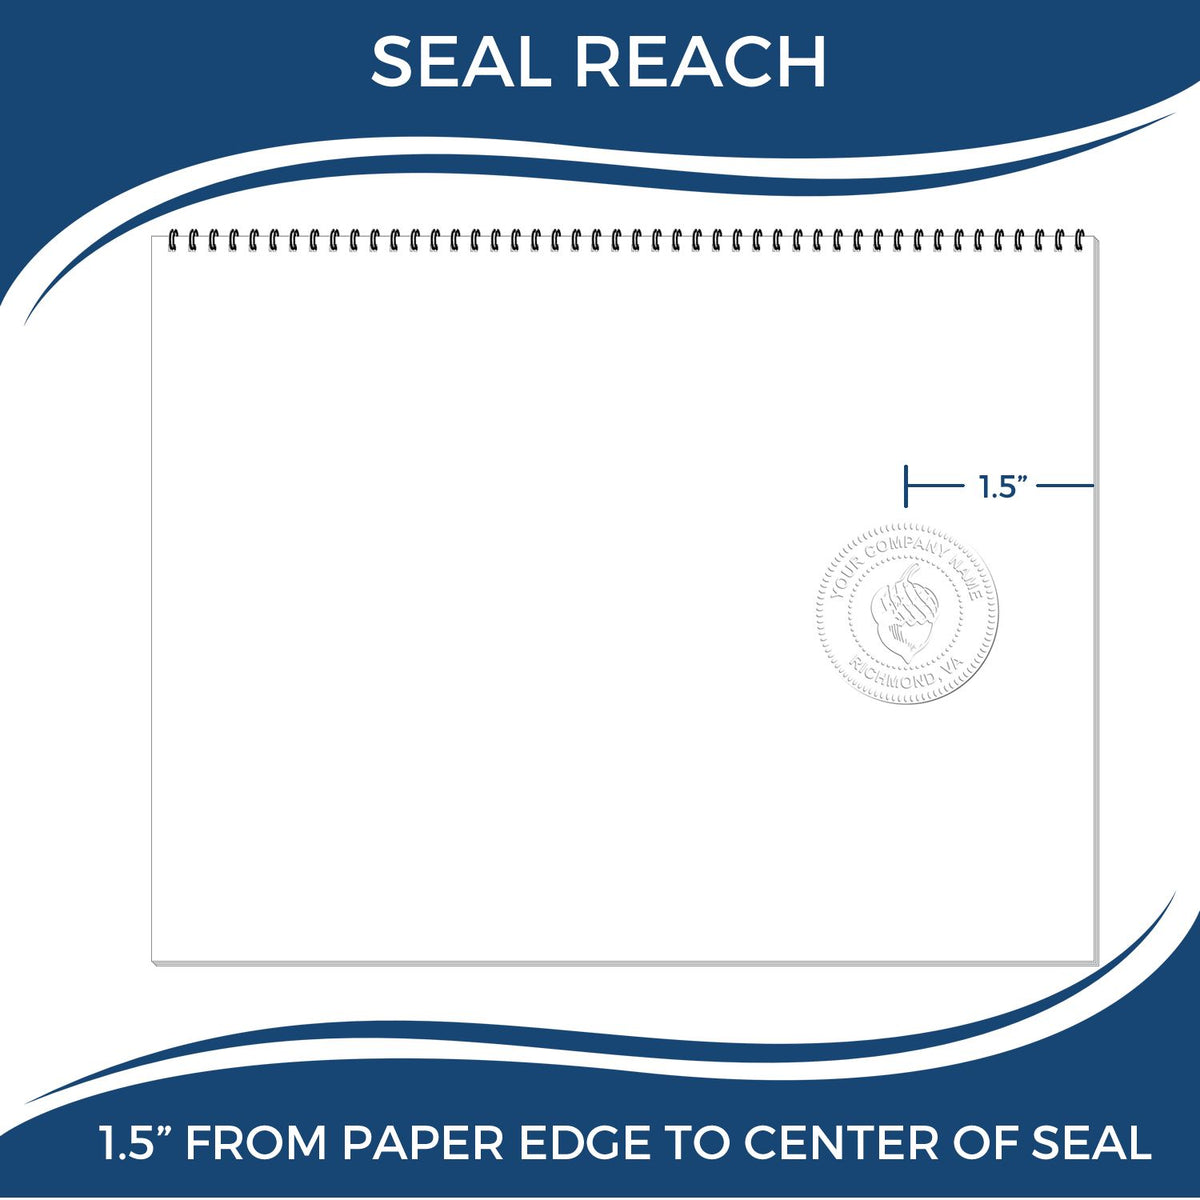 An infographic showing the seal reach which is represented by a ruler and a miniature seal image of the Soft Minnesota Professional Engineer Seal